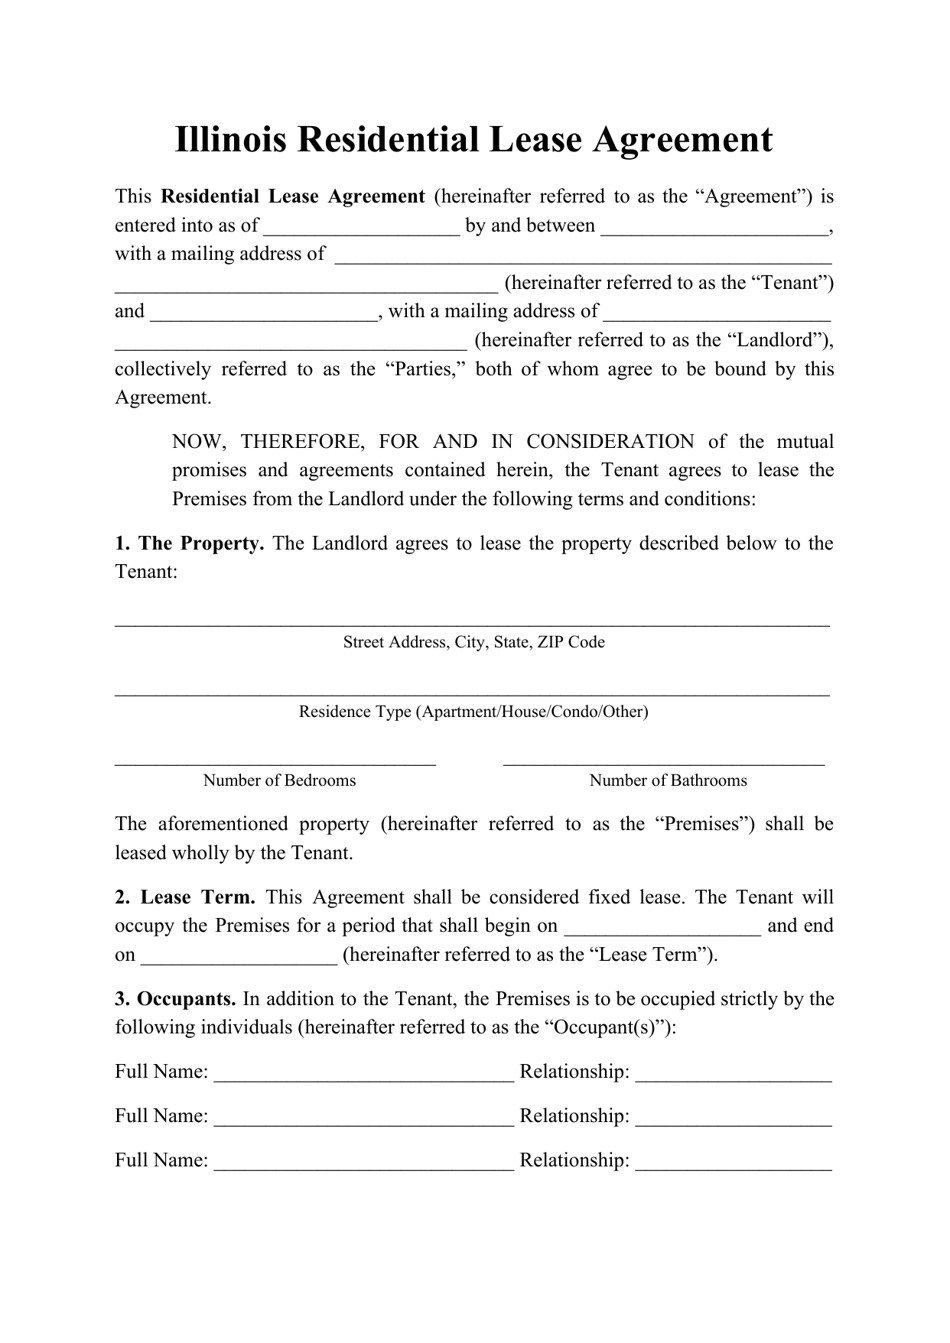 illinois-residential-lease-agreement-template-fill-out-sign-online-and-download-pdf